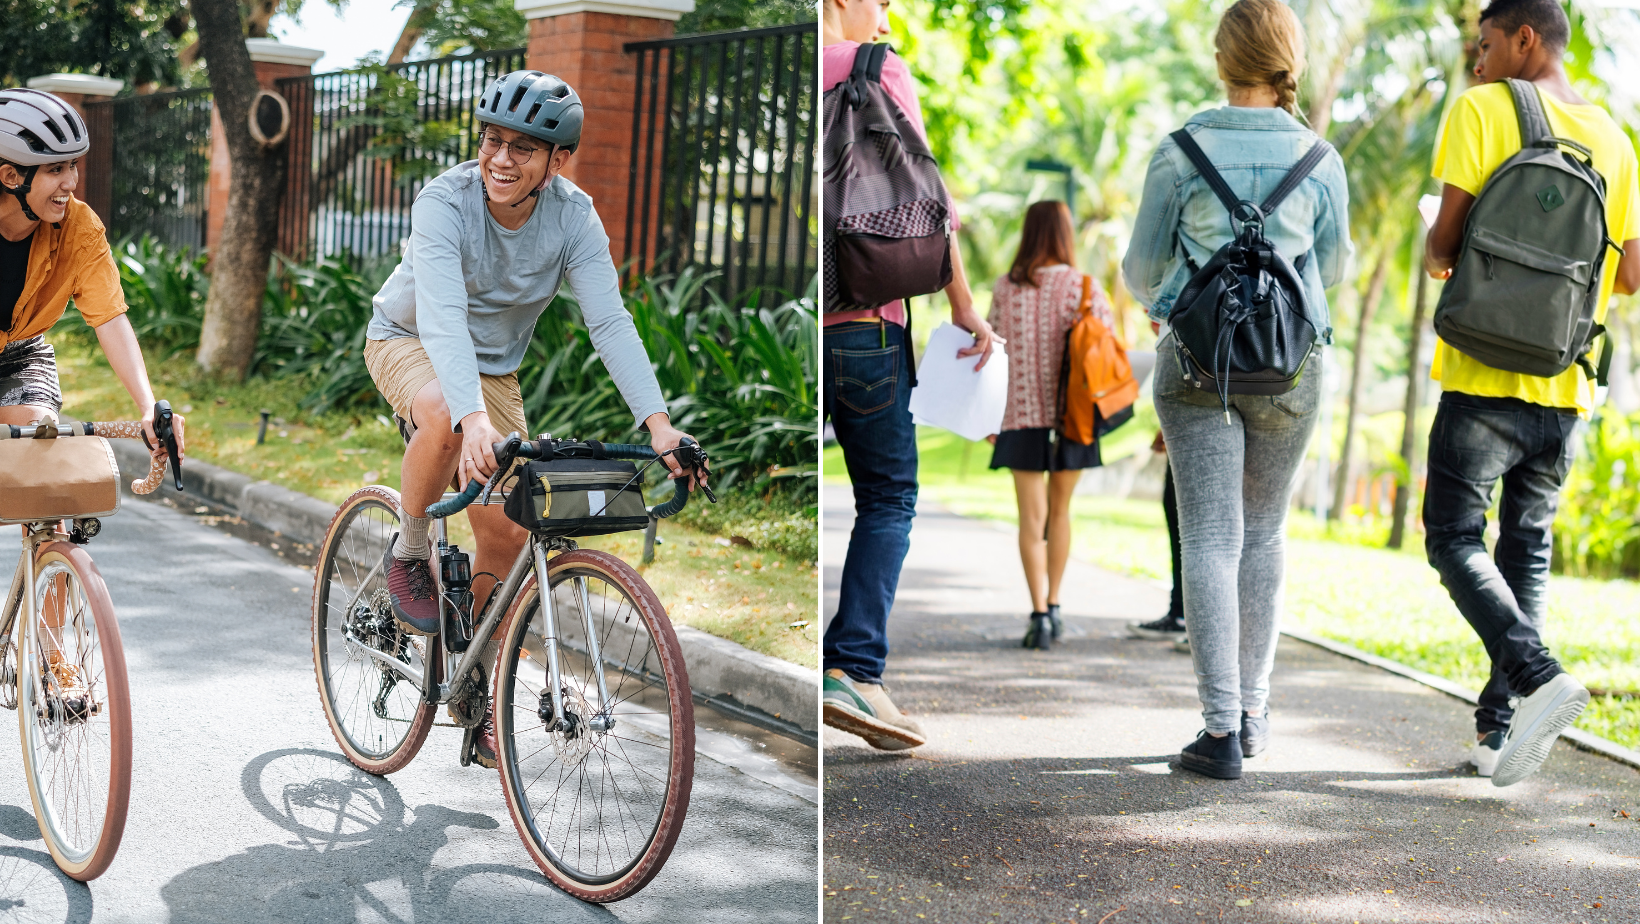 Image shows a collage of two photos depicting cycling and walking.